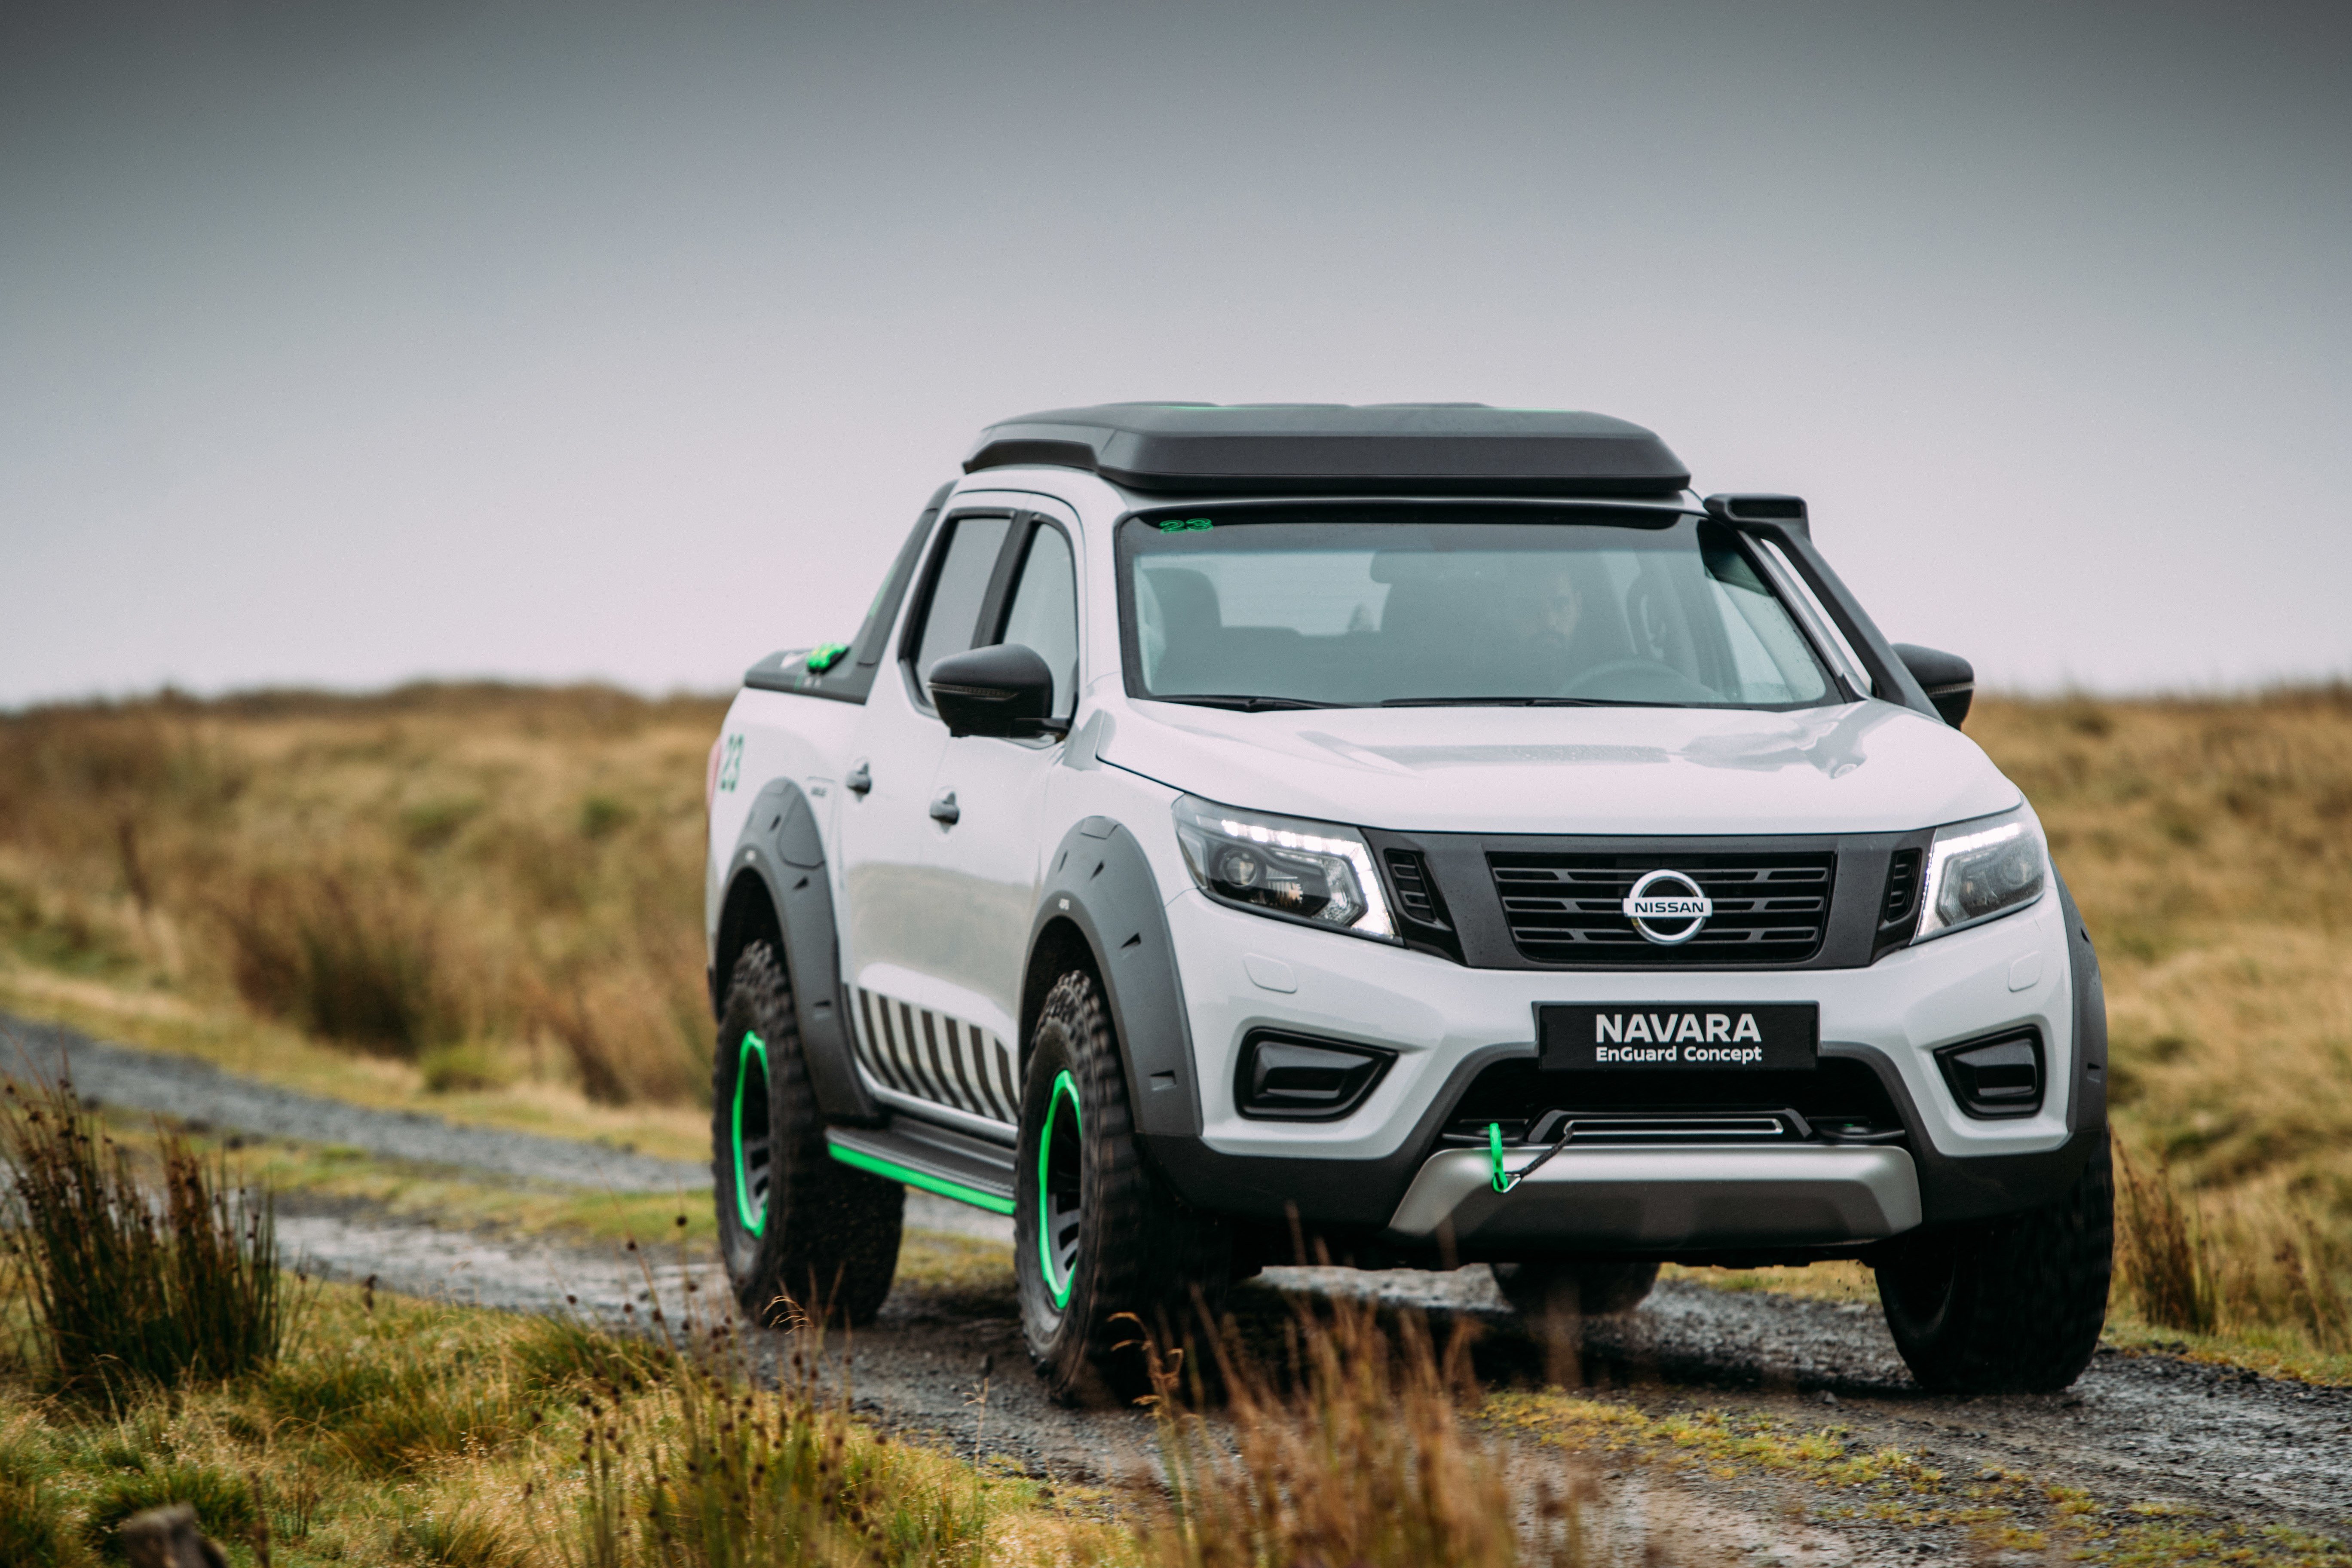 Wallpaper, Nissan, Truck, netcarshow, netcar, car image, car photo, Navara EnGuard concept, land vehicle, automotive exterior, automobile make, crossover suv, sport utility vehicle, off roading, compact sport utility vehicle, pickup